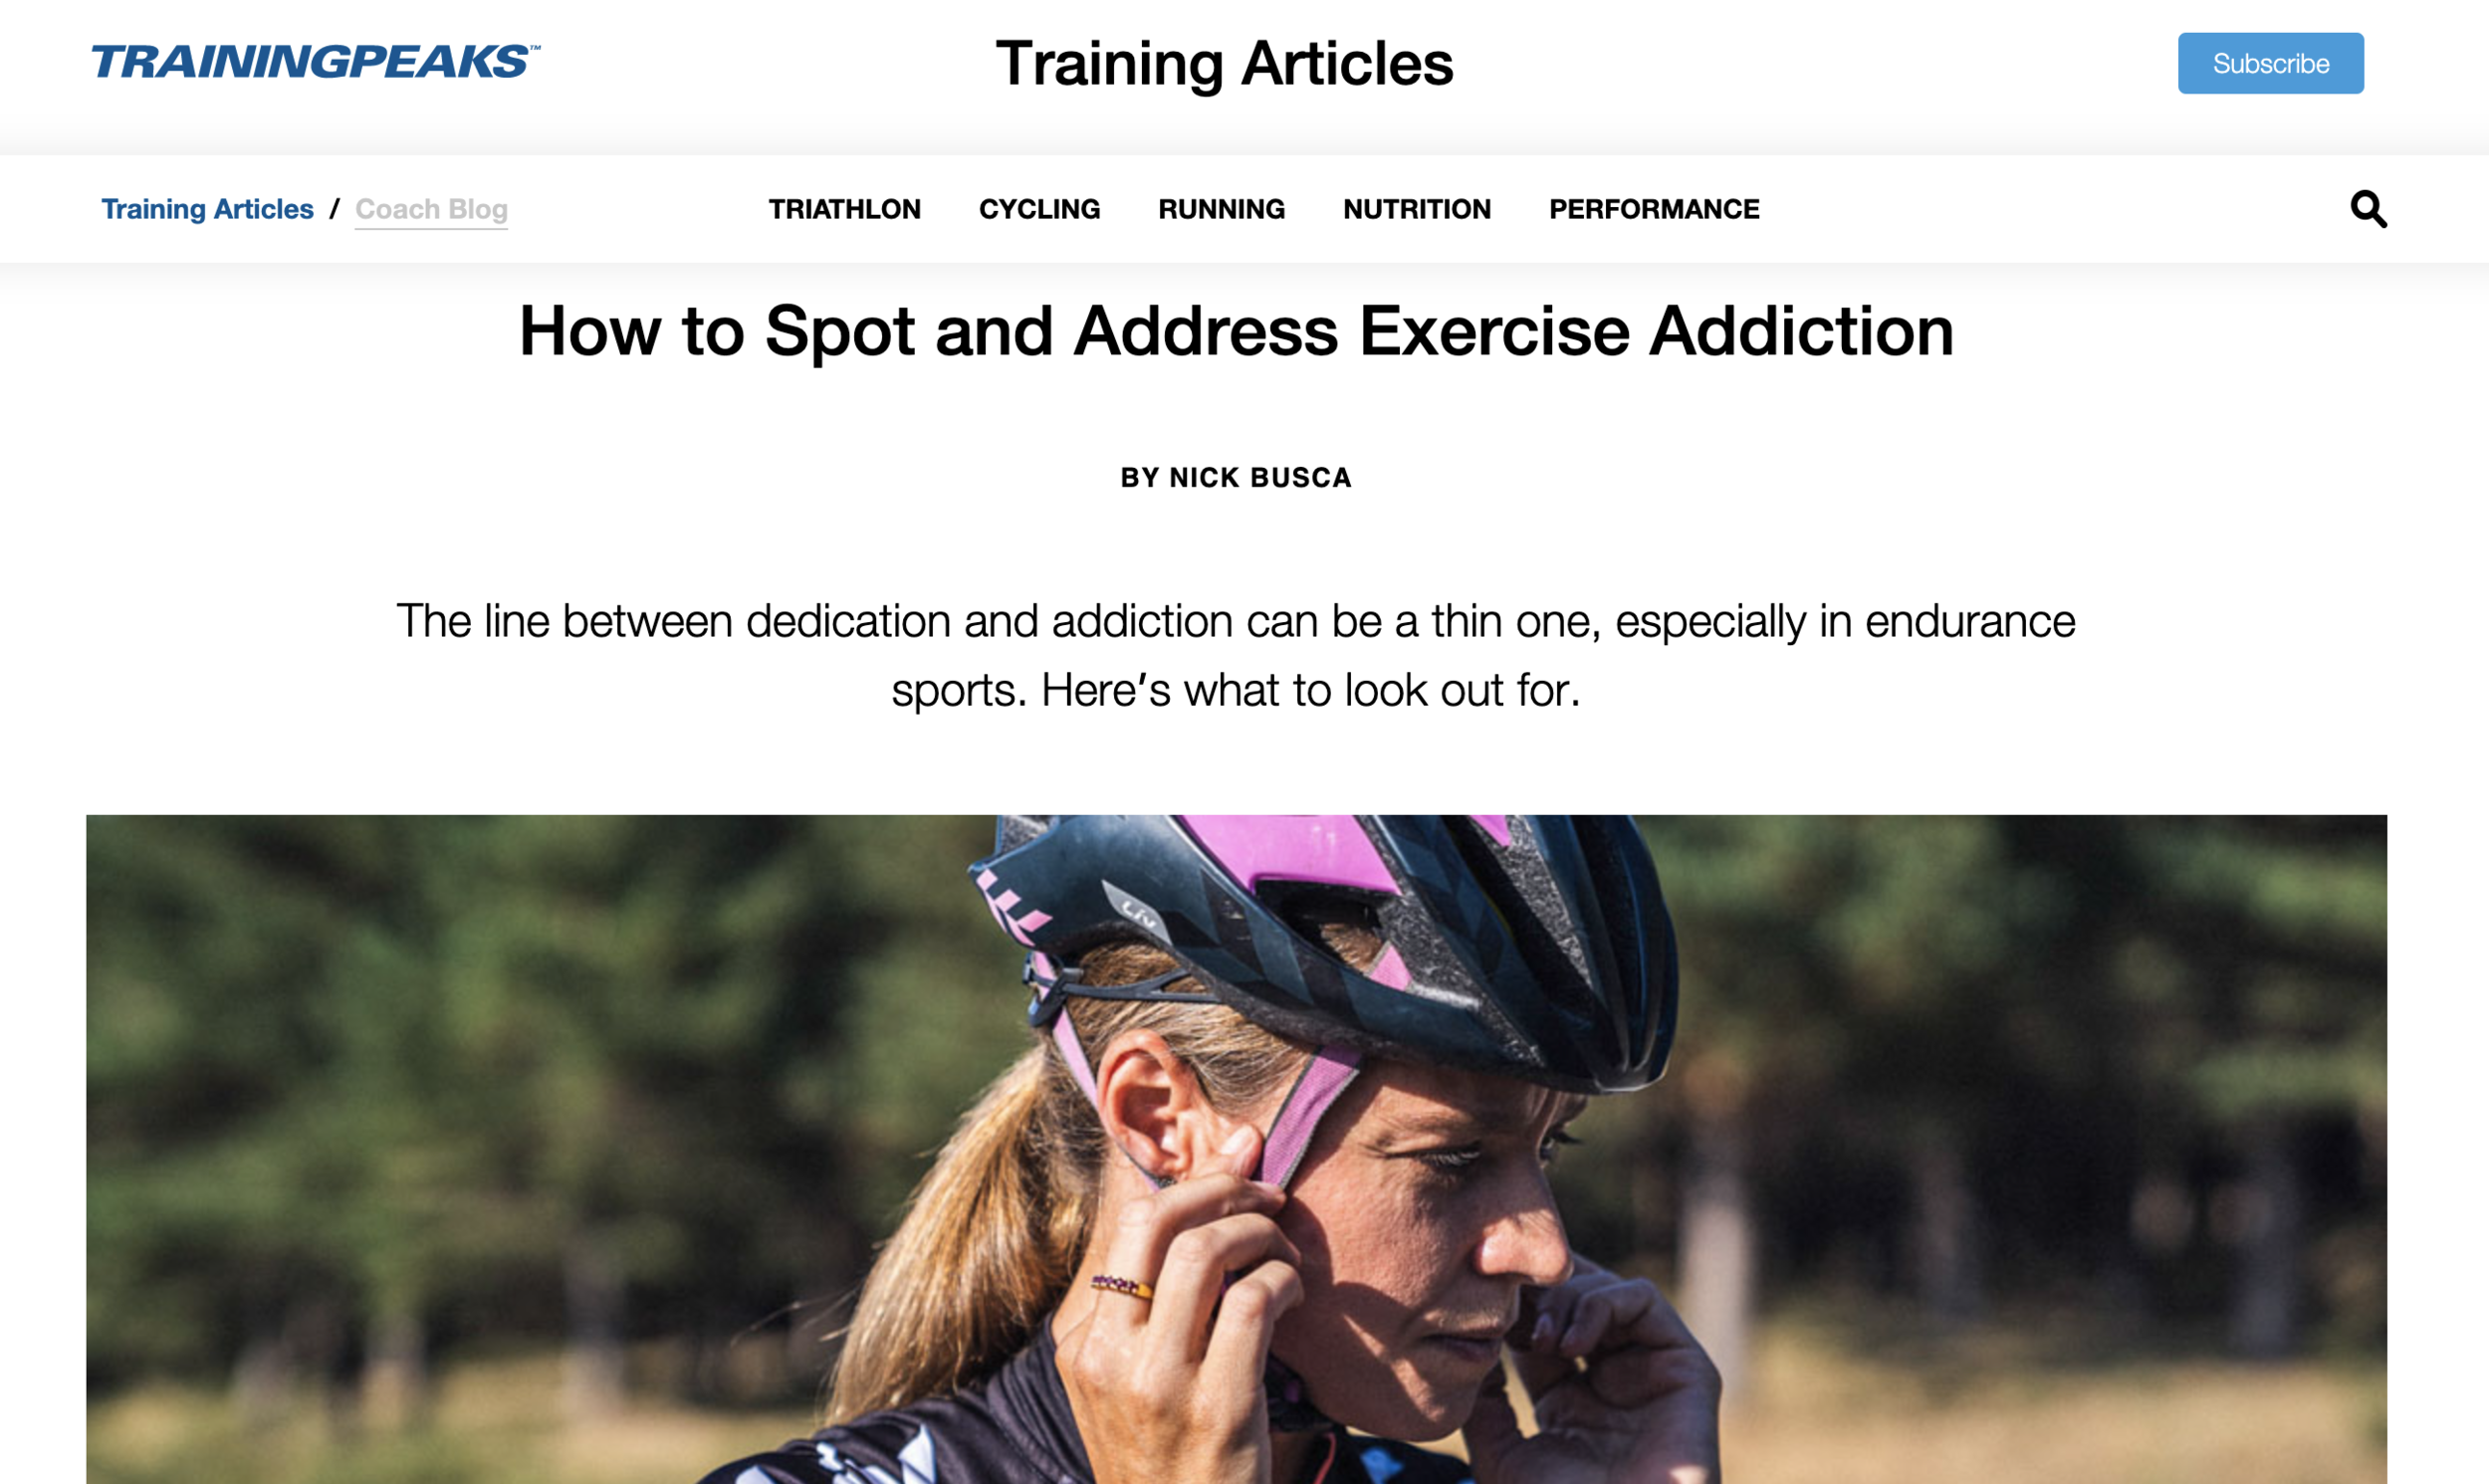 How to Spot and Address Exercise Addiction